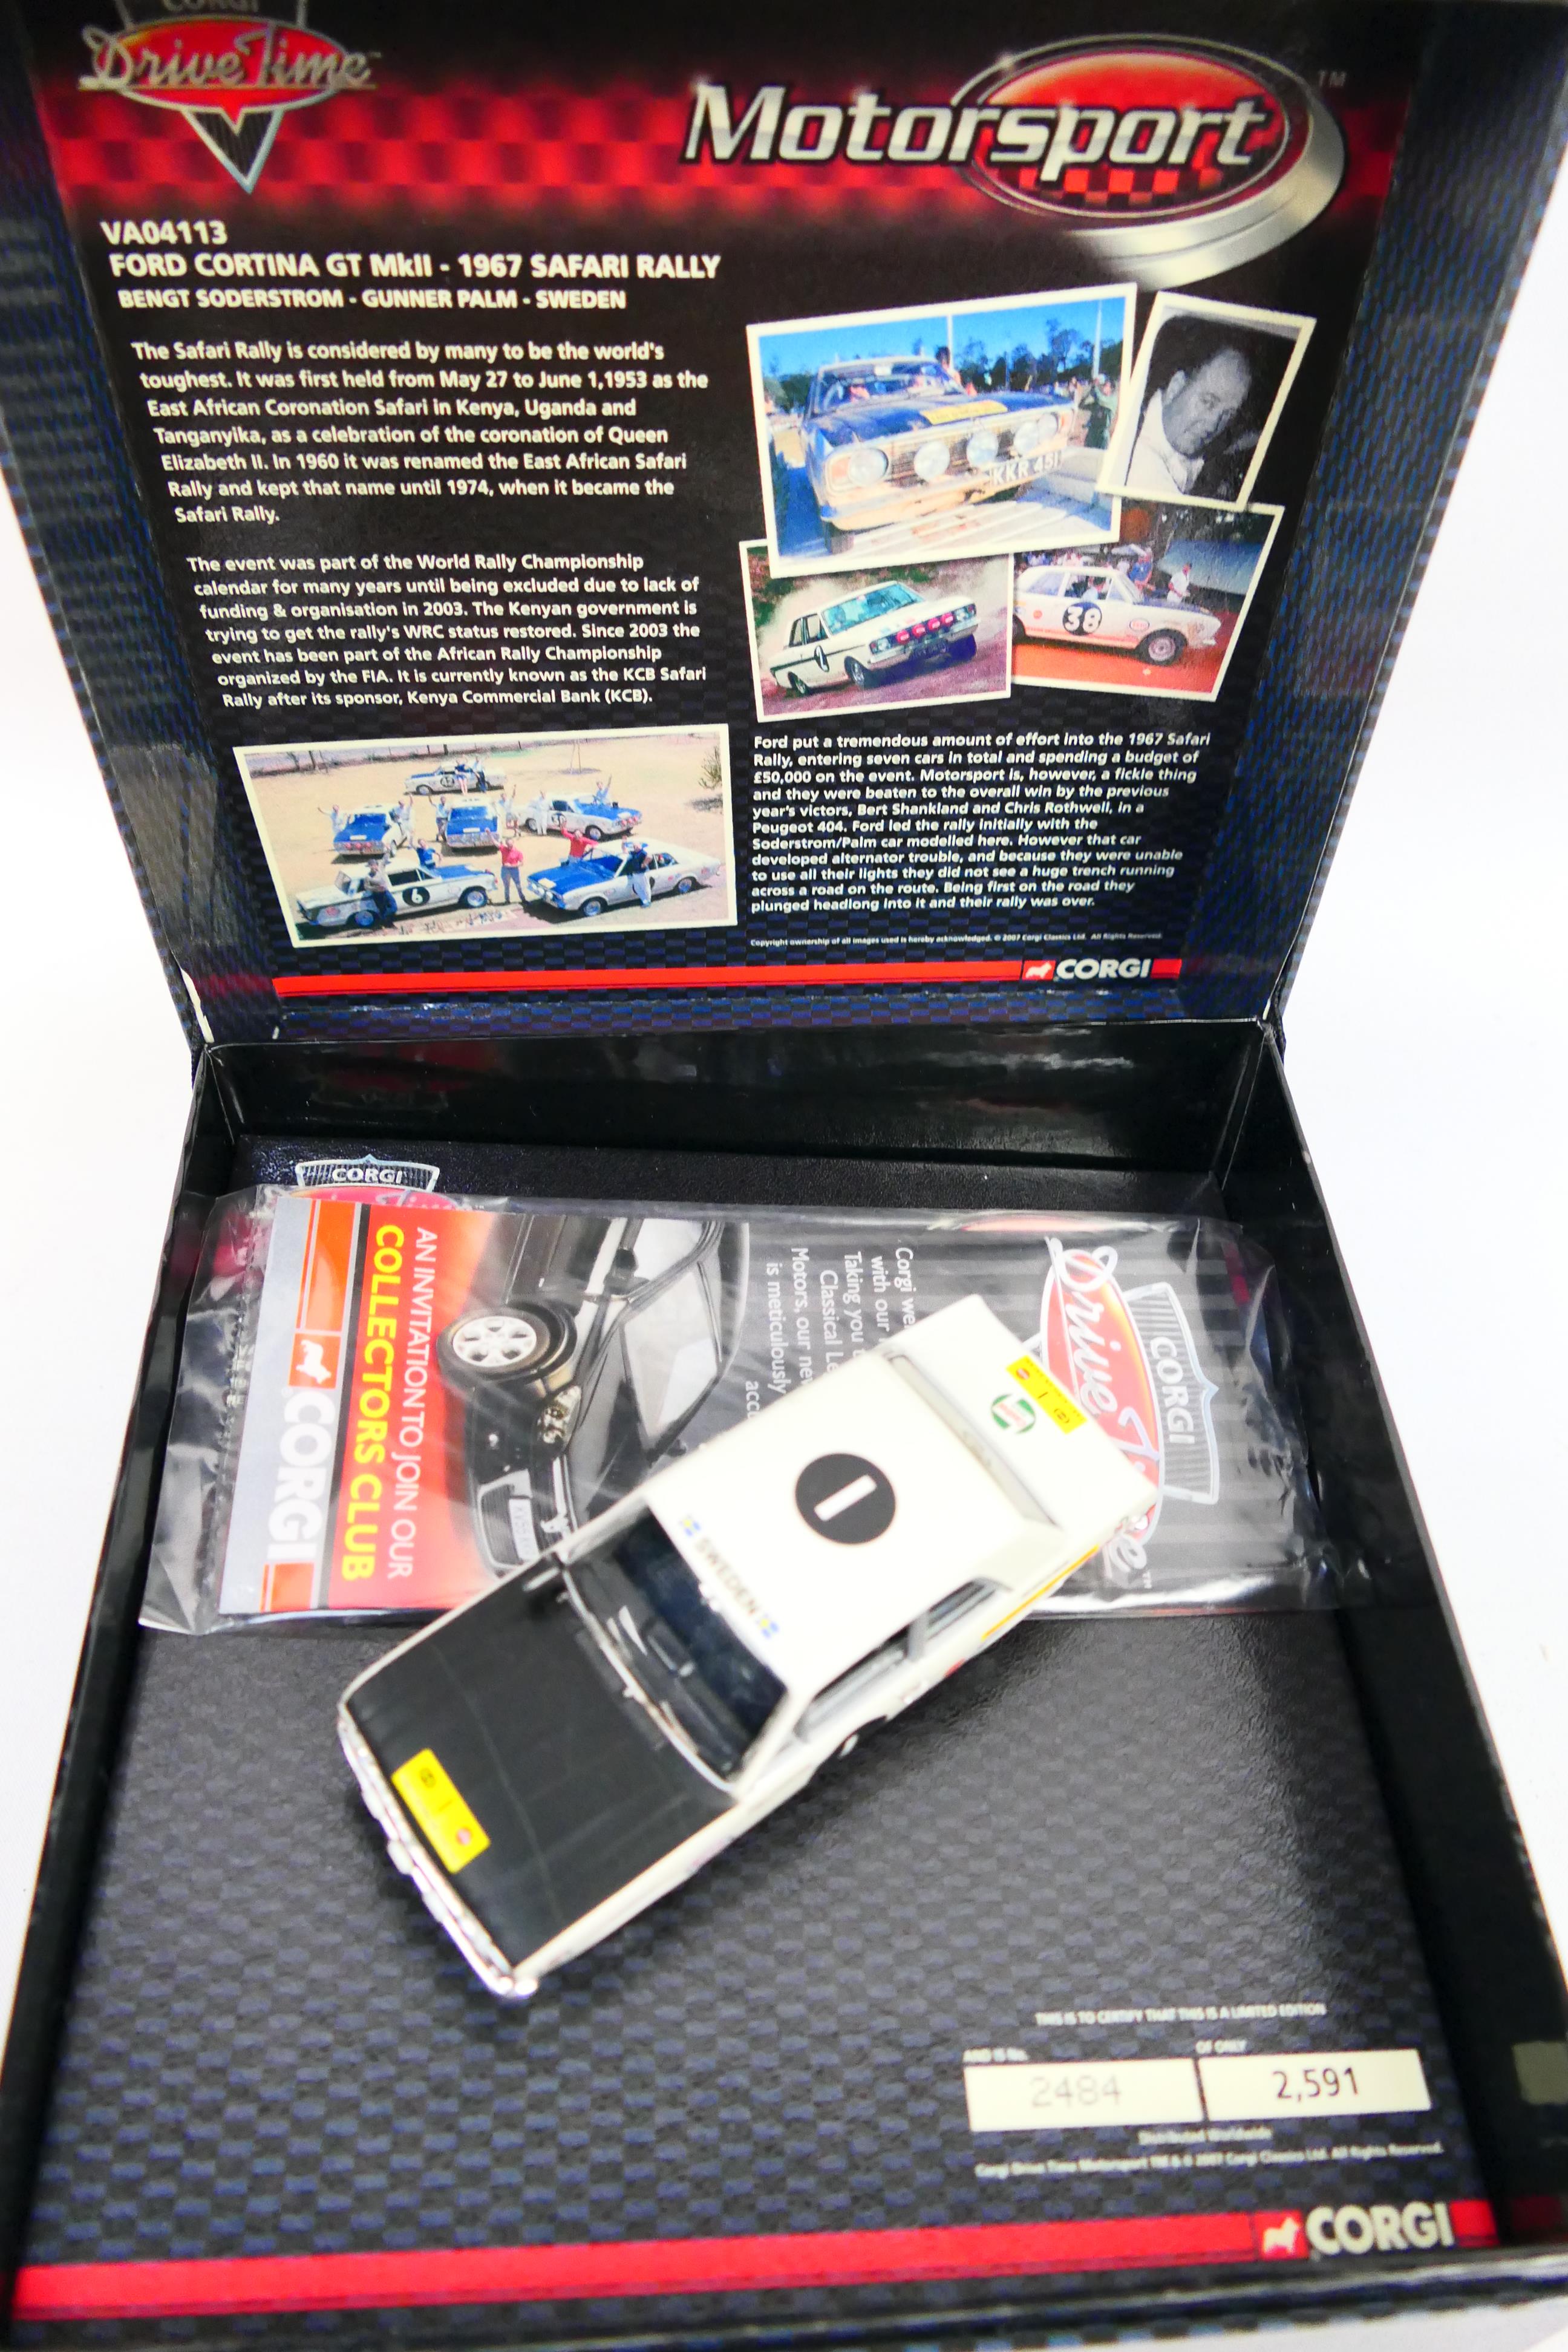 Corgi - Schuco - Burago - An assortment of 12 boxed cars from a number of different brands (8 Corgi, - Image 8 of 8